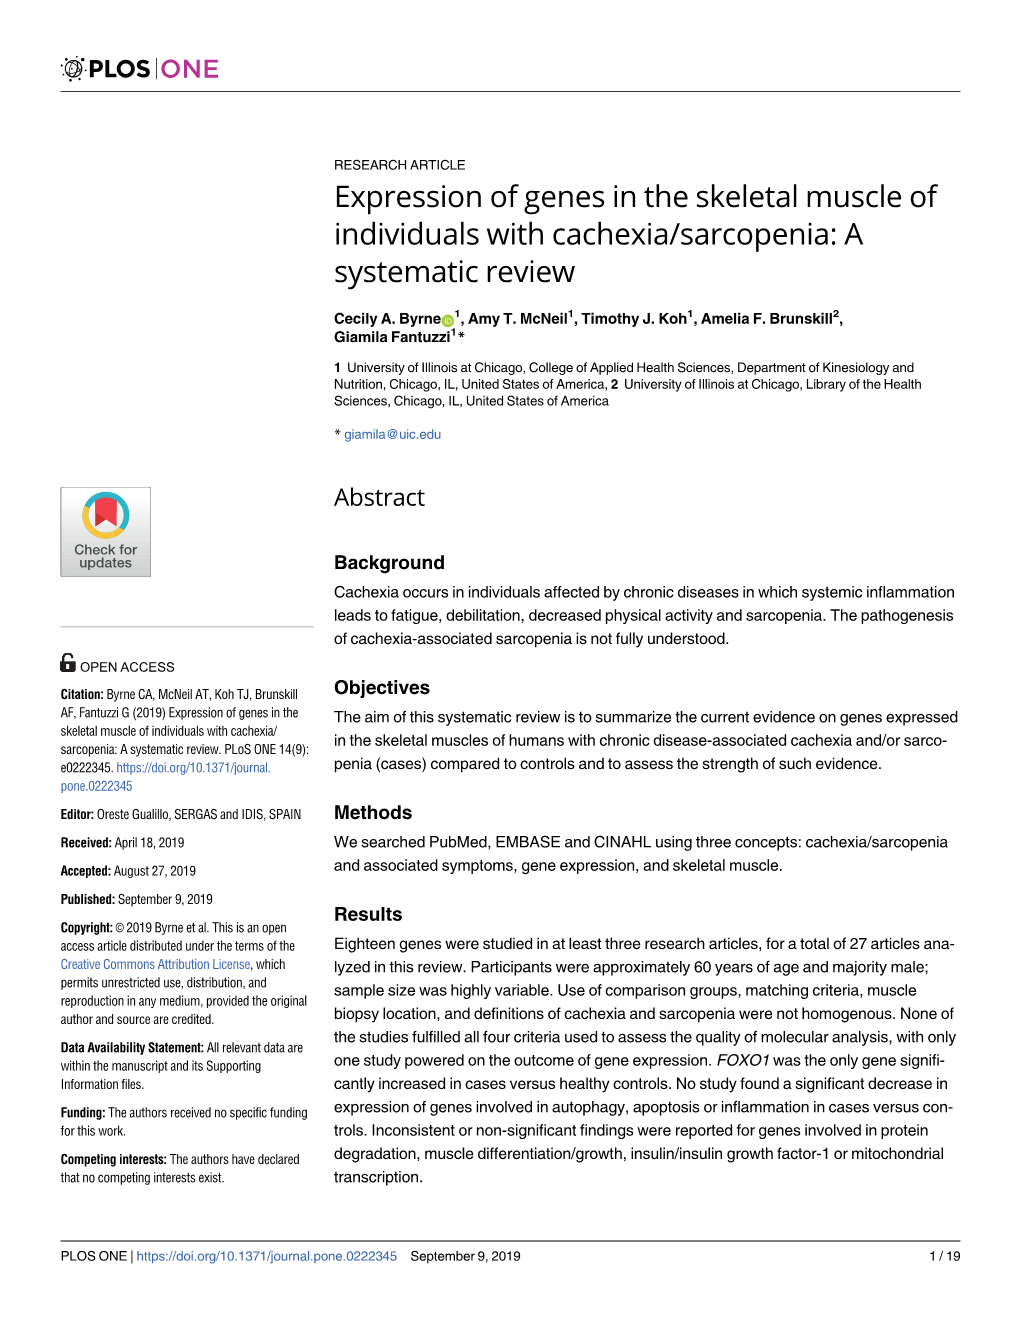 Expression of Genes in the Skeletal Muscle of Individuals with Cachexia/Sarcopenia: a Systematic Review